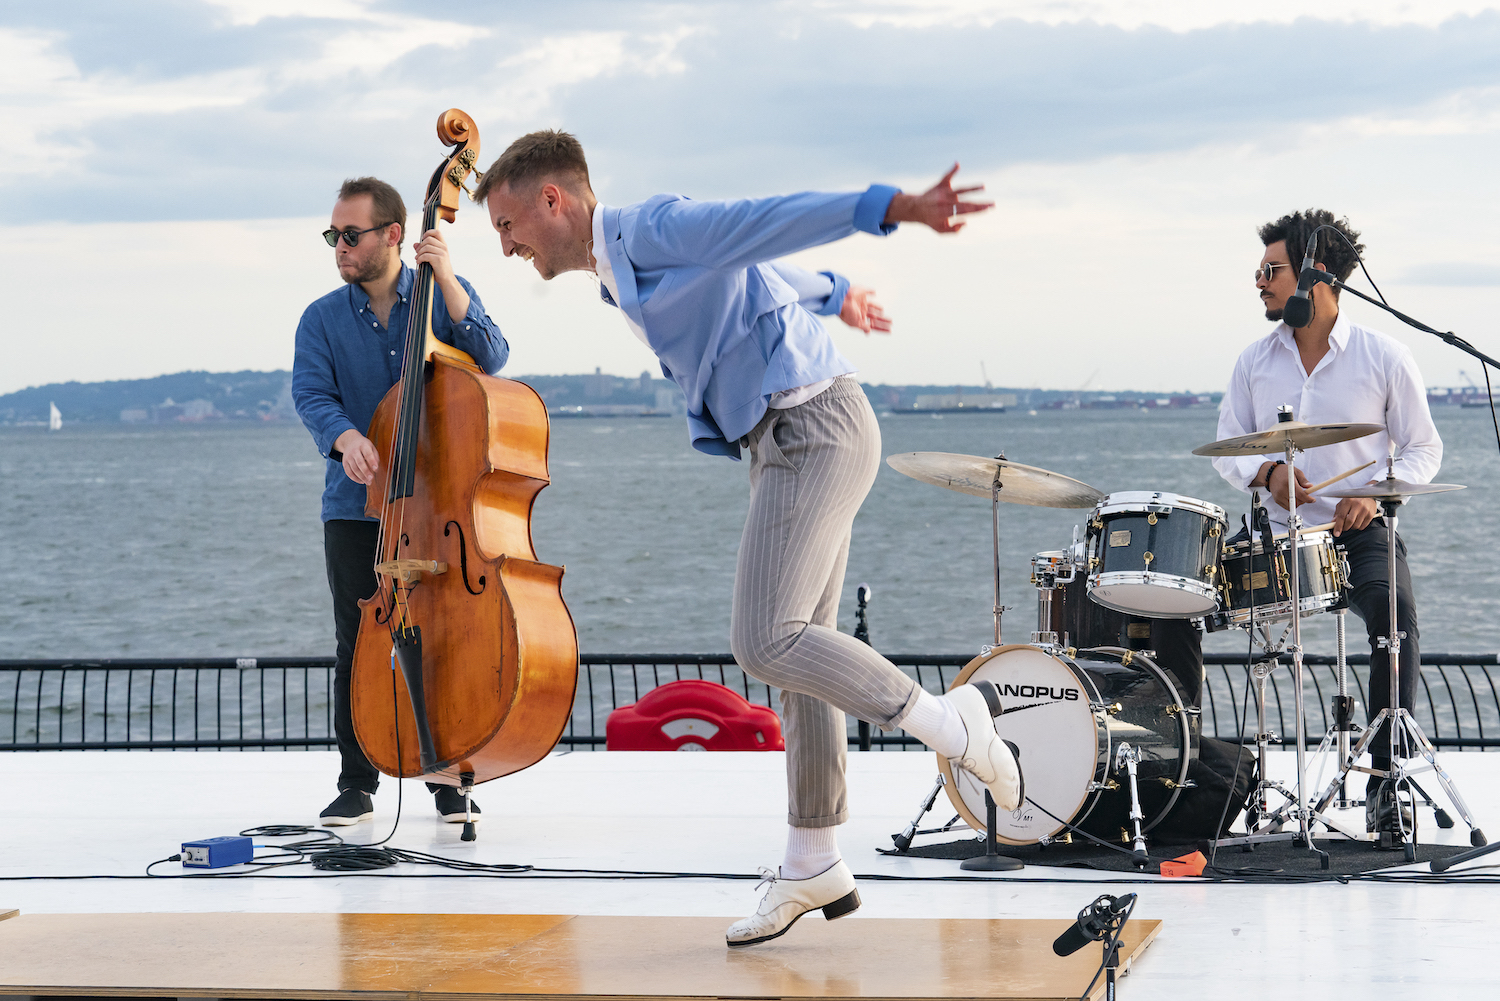 Luke Hickey is caught in profile, arms flying behind him as he taps, grinning, on a shiny tap board. He wears white tap shoes, grey pants, and a sky blue blazer.Behind him on the outdoor stage are a standing bass player and a musician at a drum kit. Beyond the stage, ocean.